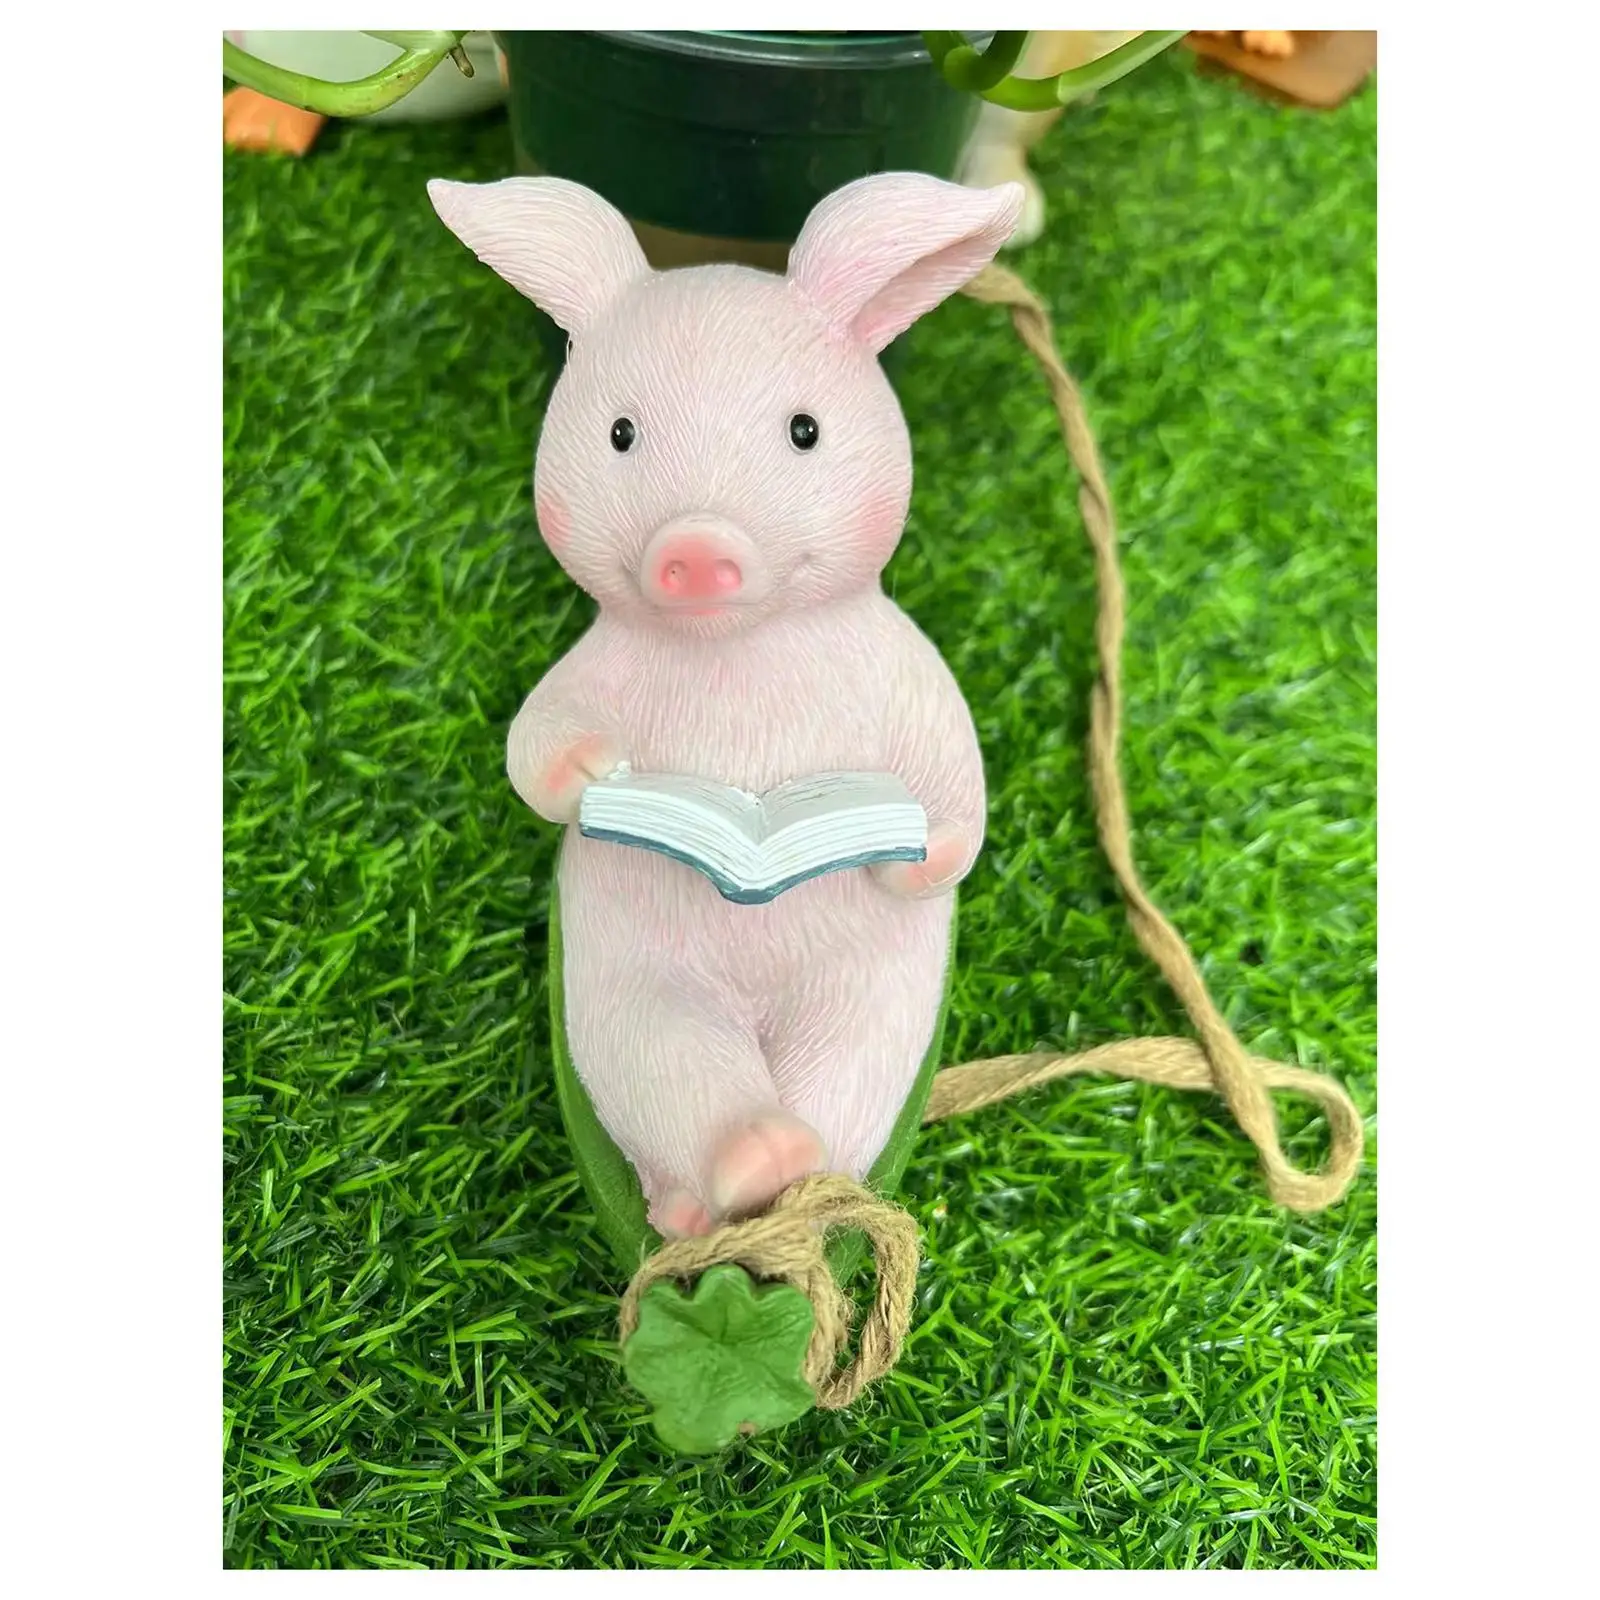 Realistic Pig Statues Pig Sculptures Statues Decorative Cute Animal Ornament for Outside Backyard Patio Lawn Housewarming Gifts